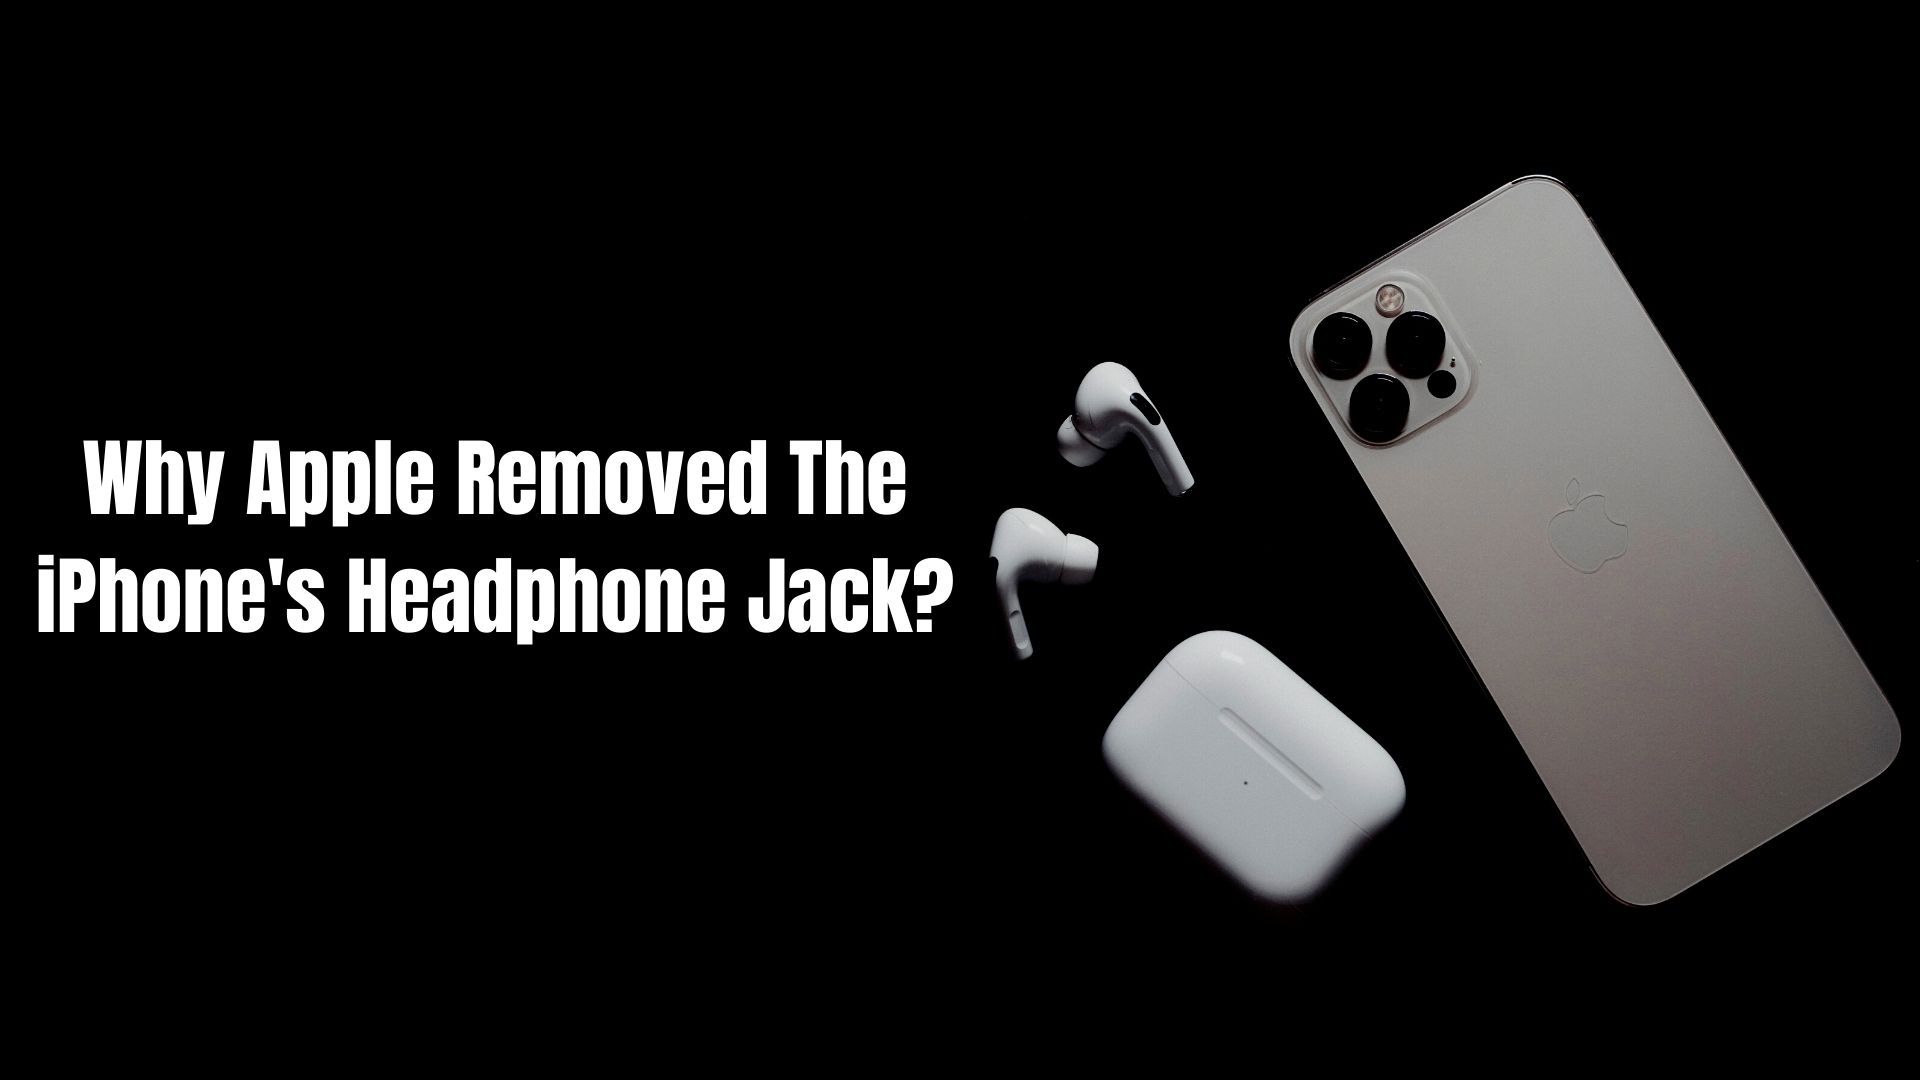 Why Apple Removed The iPhone's Headphone Jack